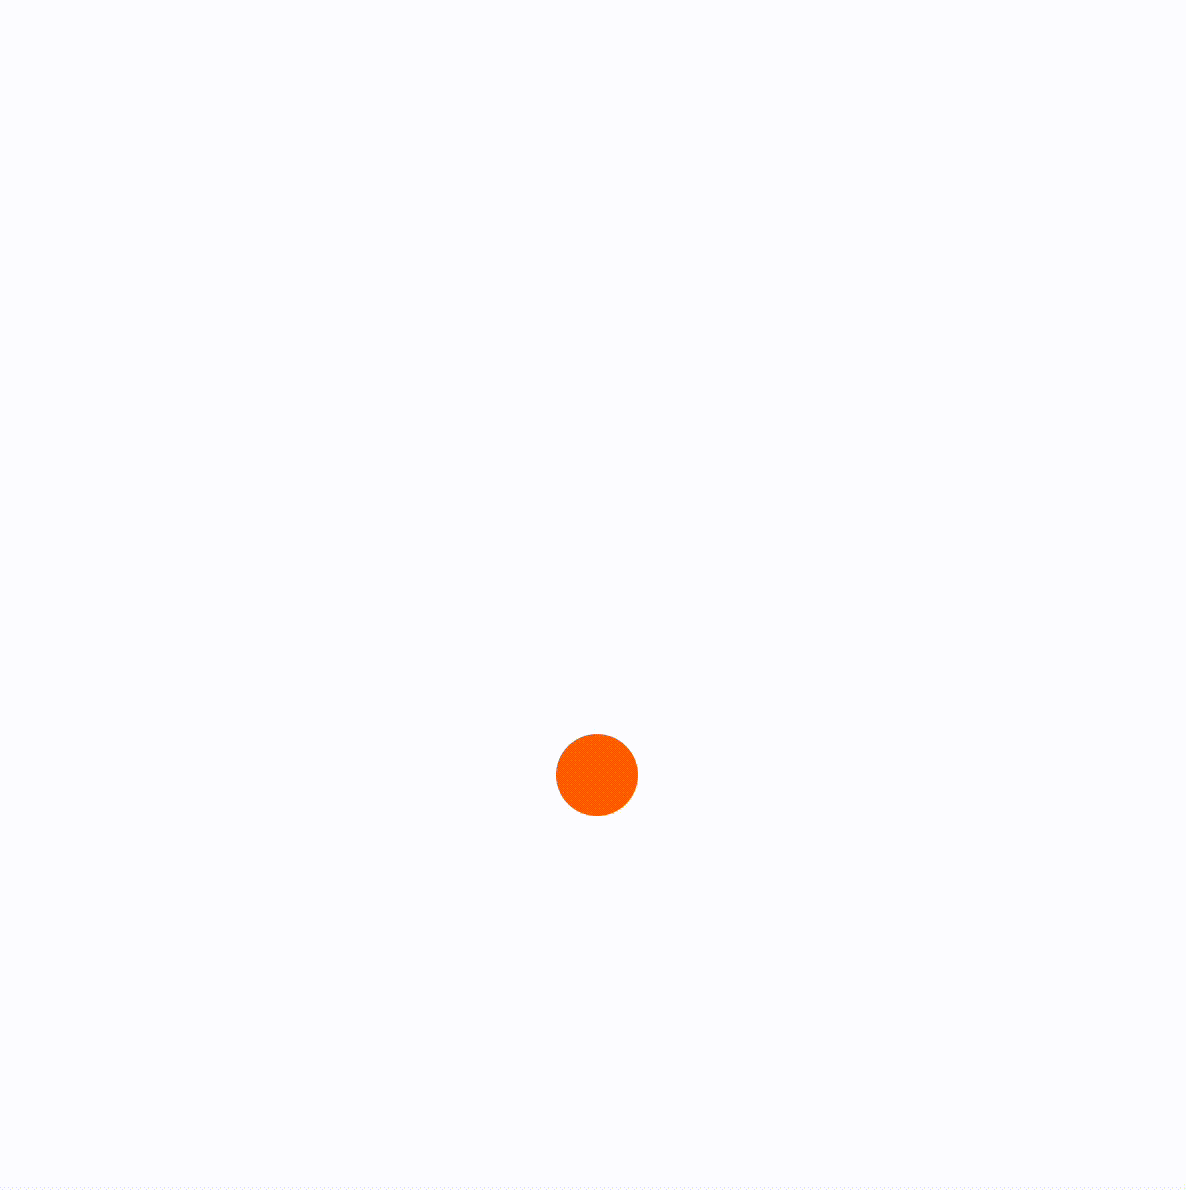 An orange particle which bounces up and down. It bounces to slightly lower heights each time.